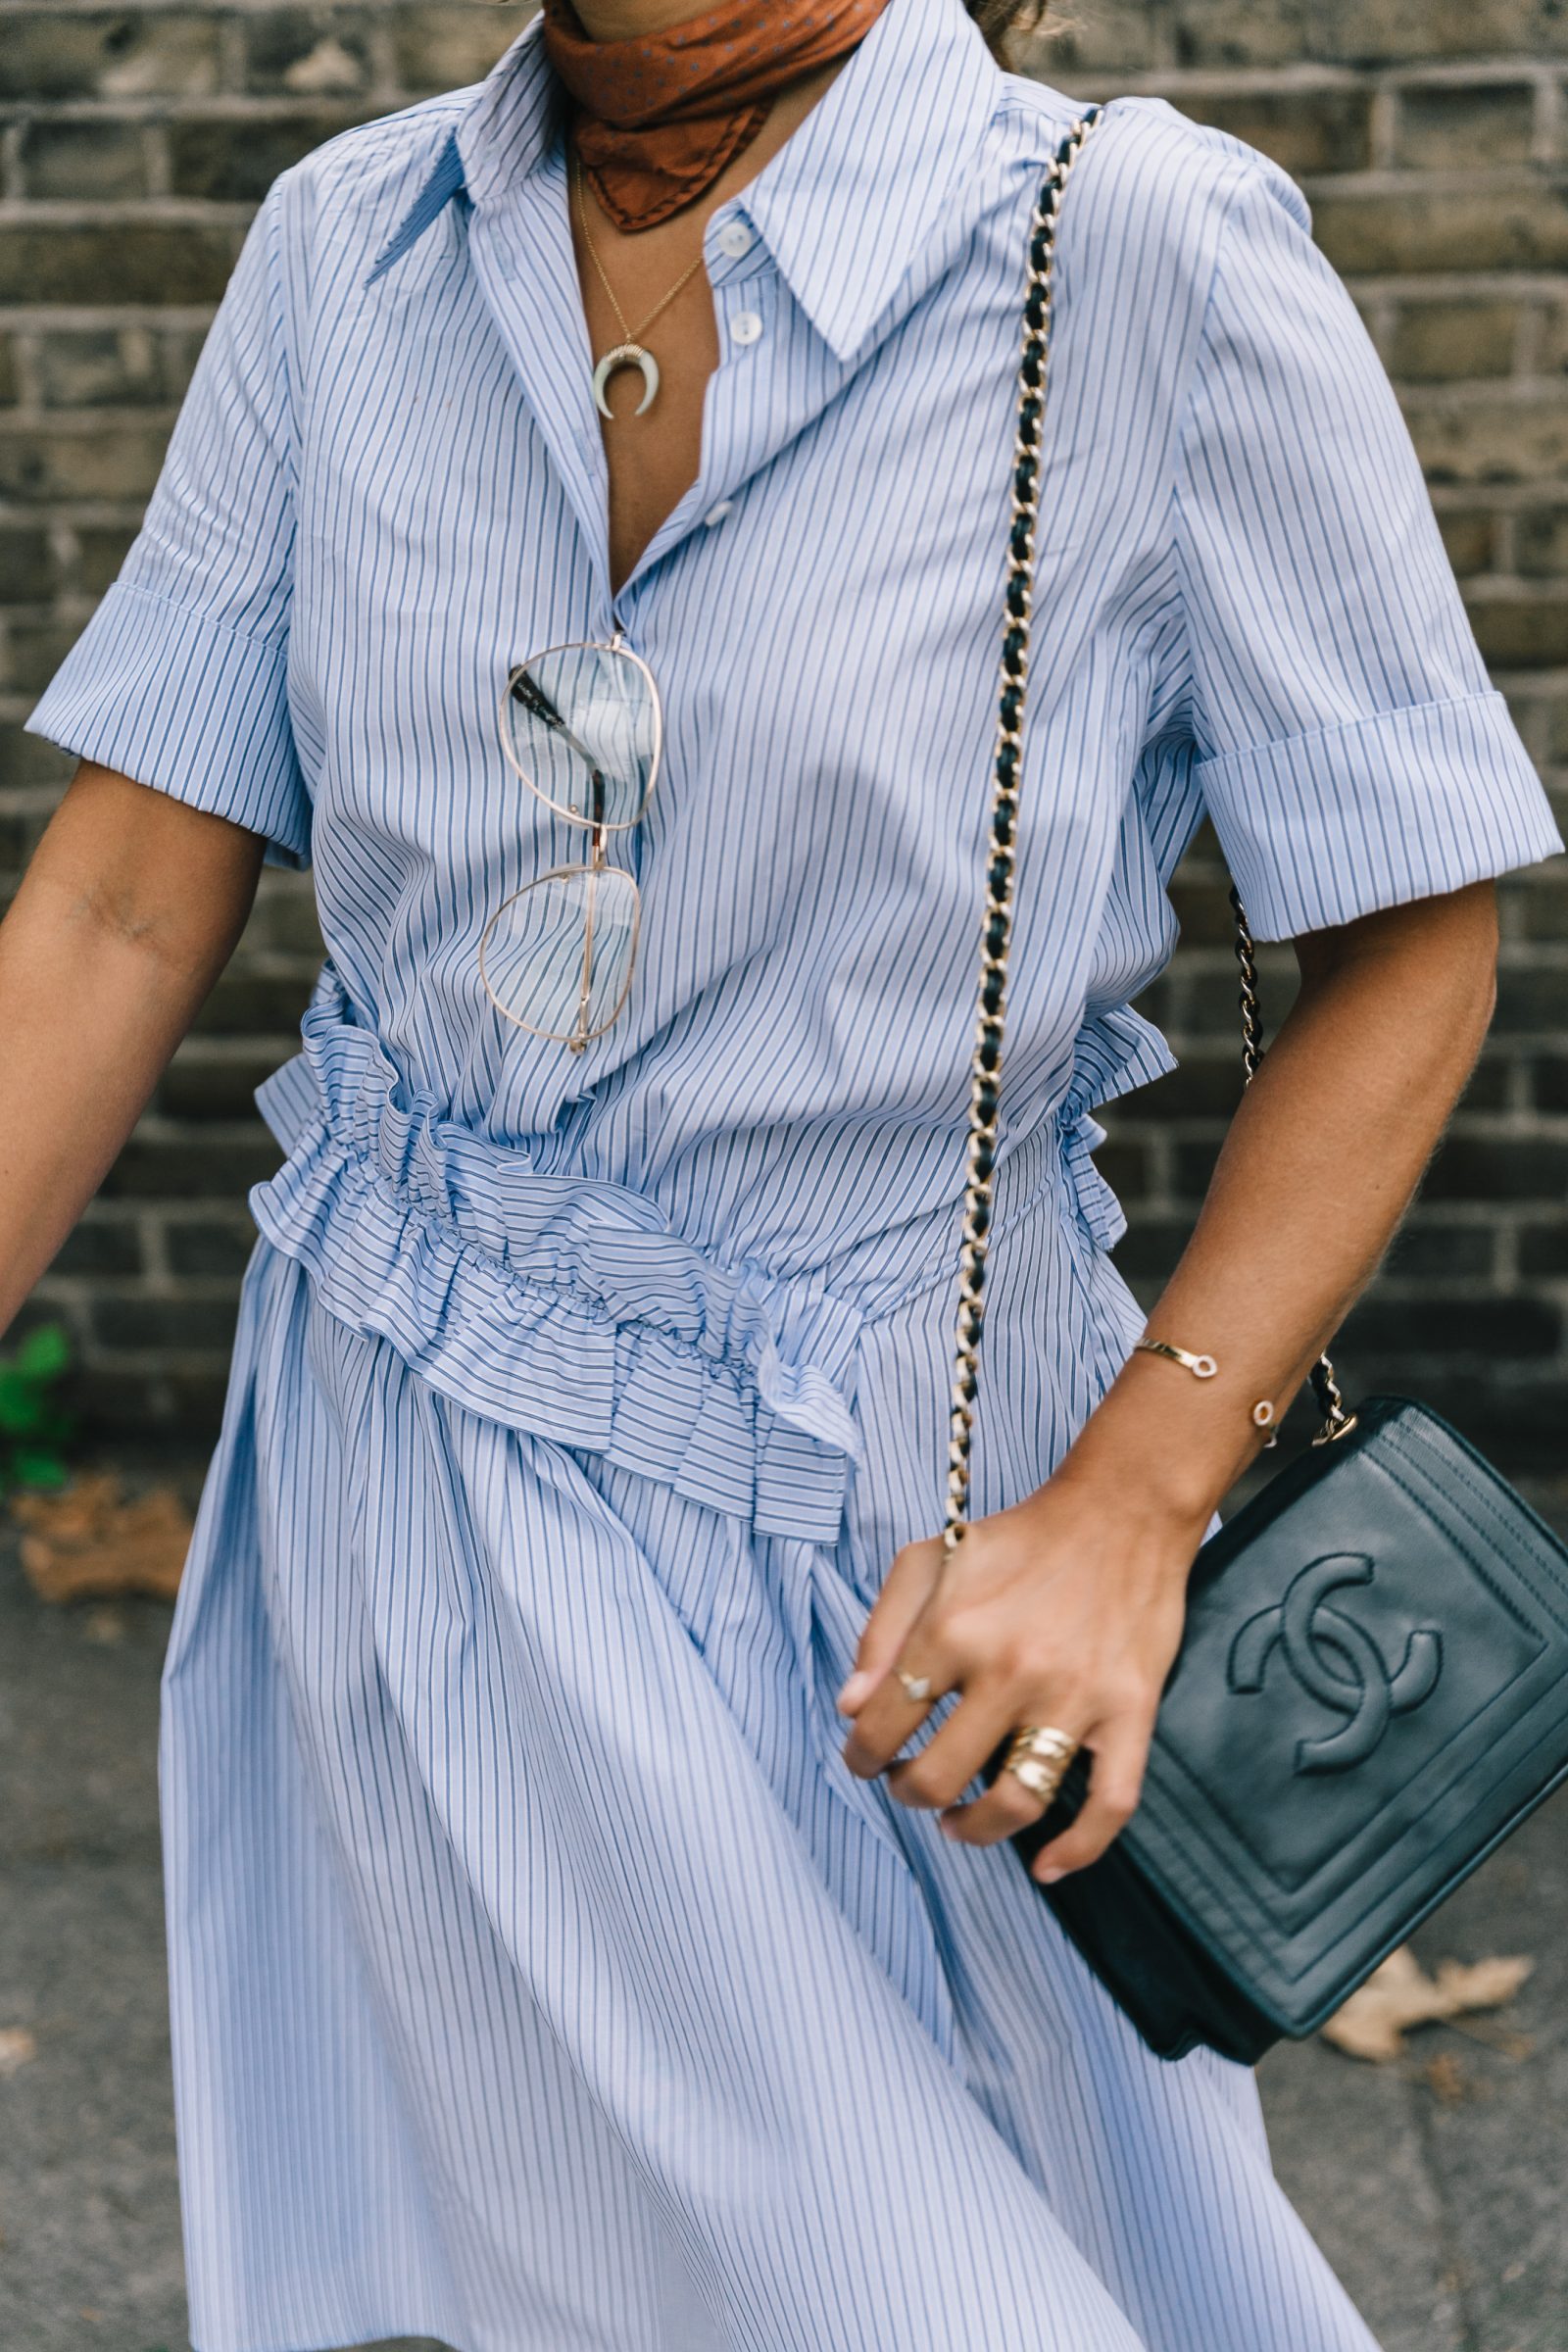 lfw-london_fashion_week_ss17-street_style-outfits-collage_vintage-vintage-stripped_dress-victoria_beckham-avenue_32-61